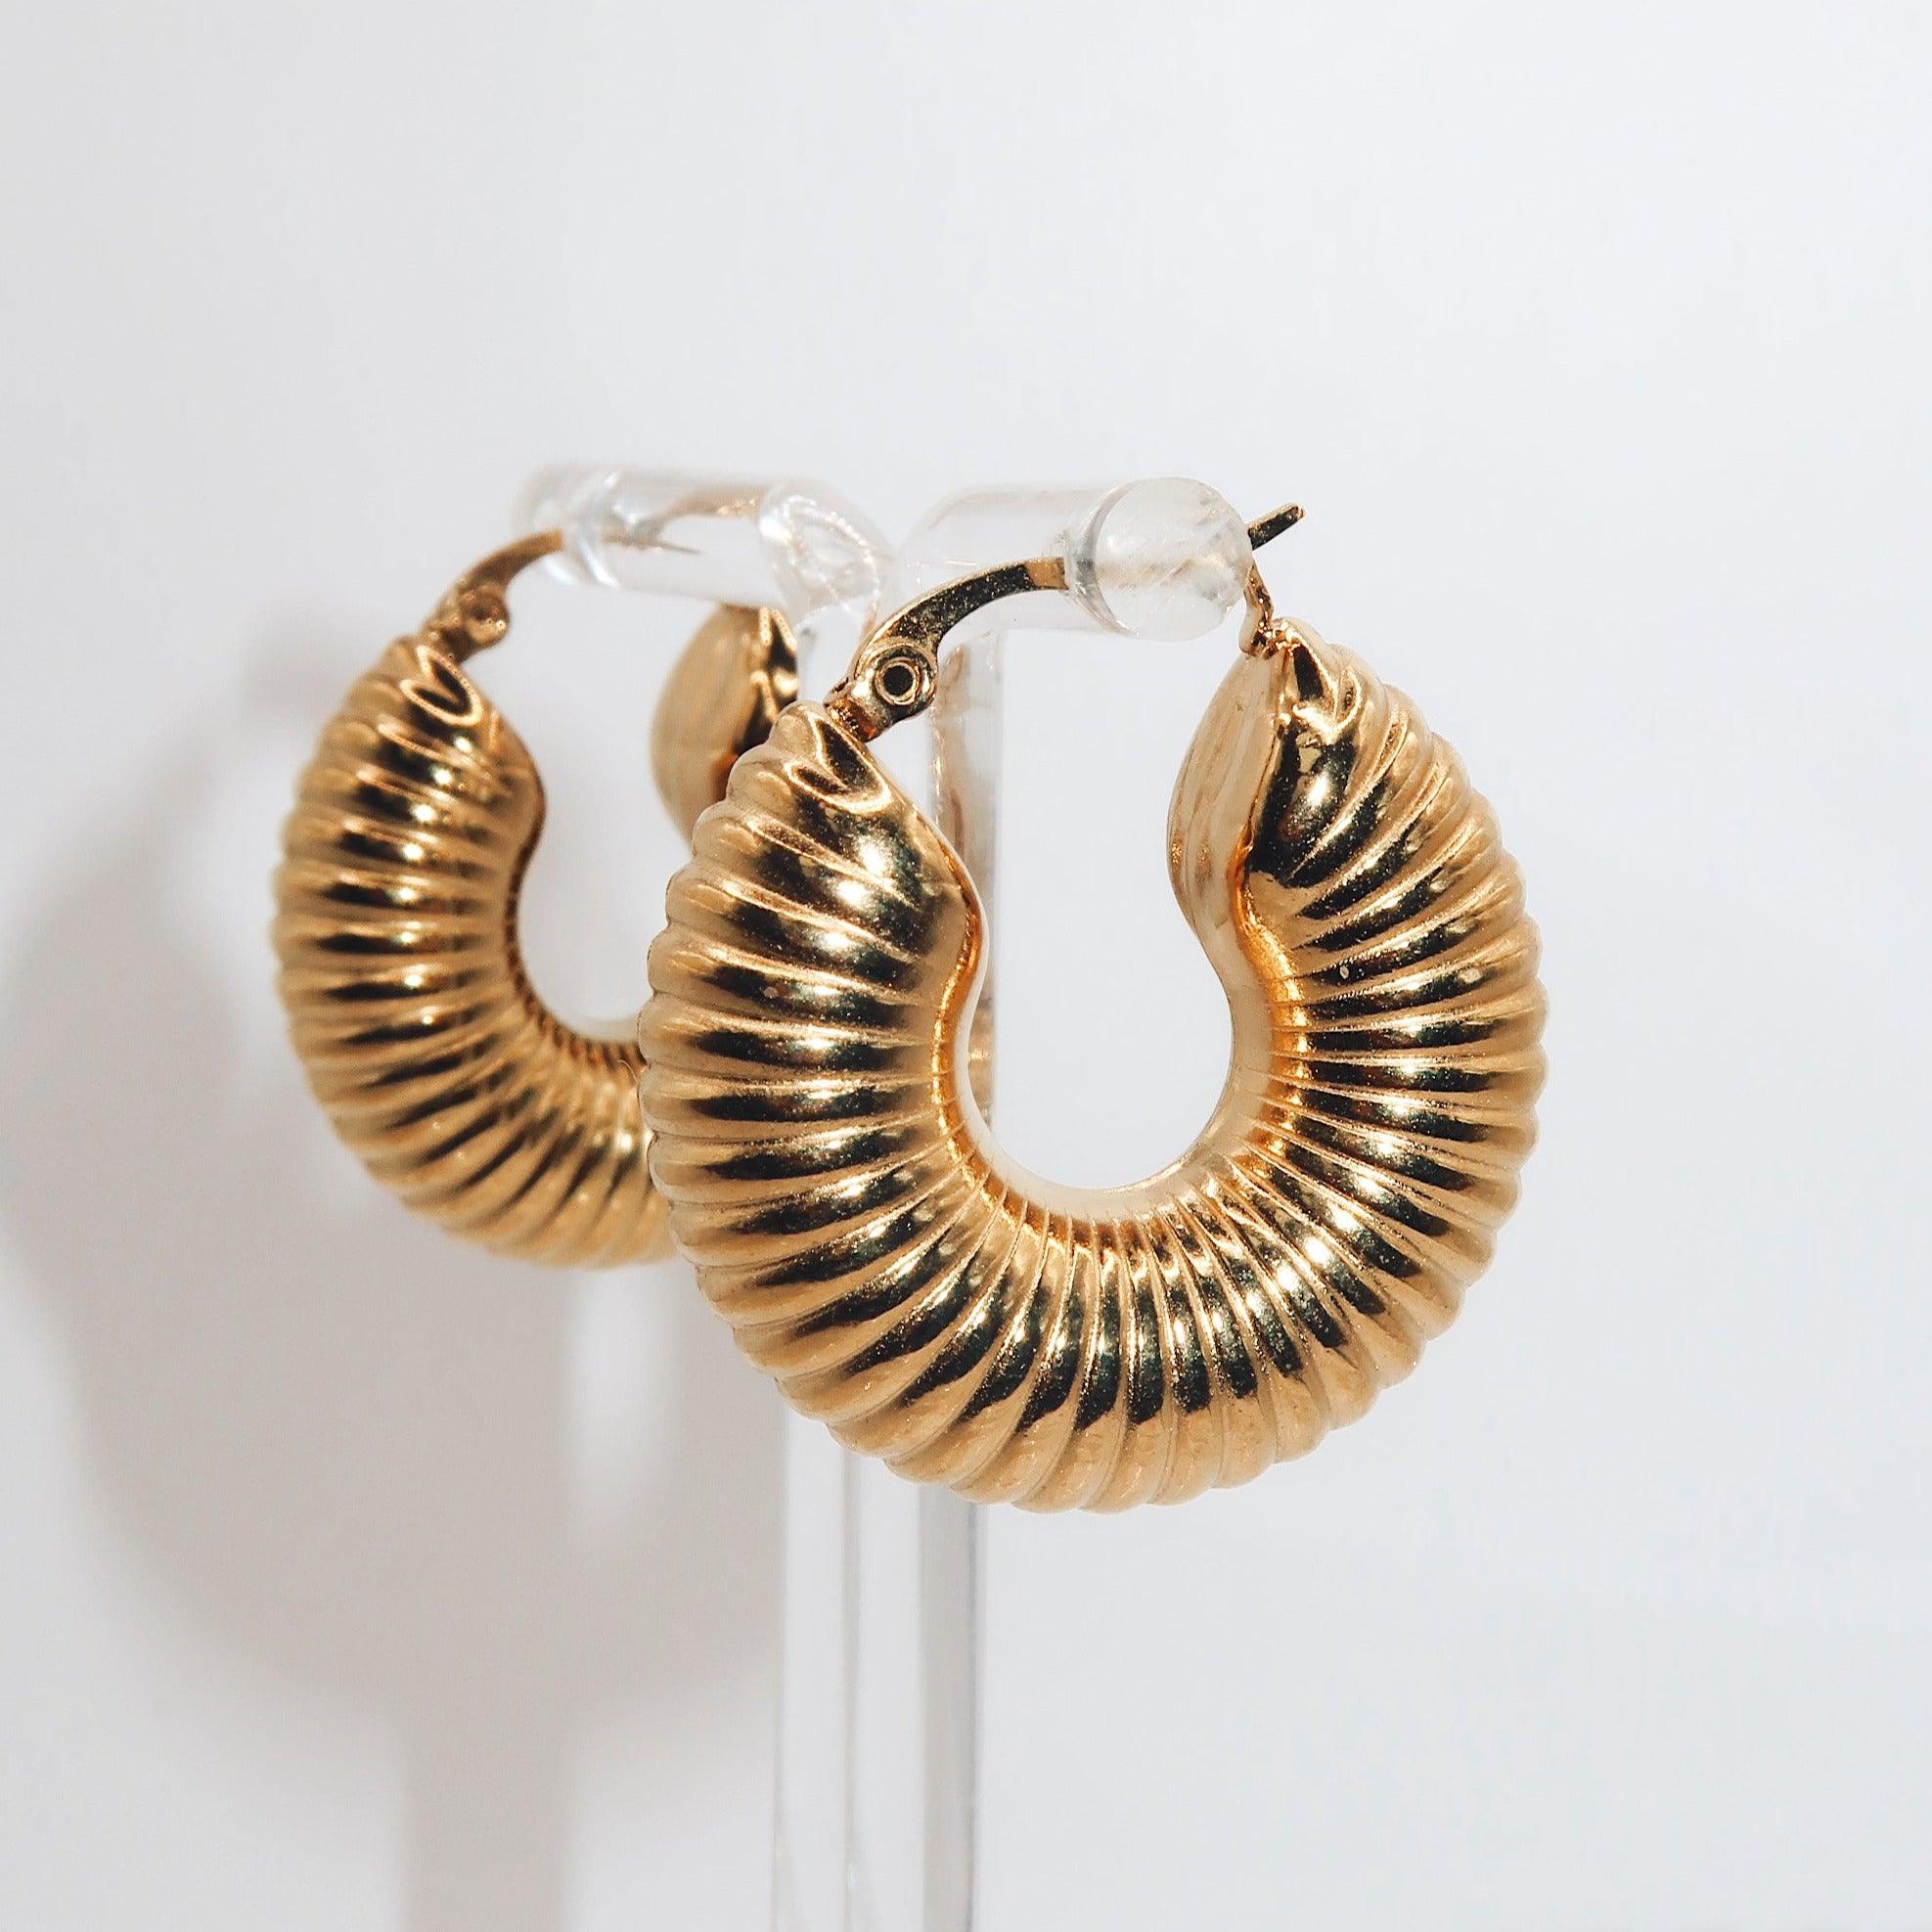 YASMINE - 18K PVD Gold Plated Chunky Hoop Earrings - Mixed Metals